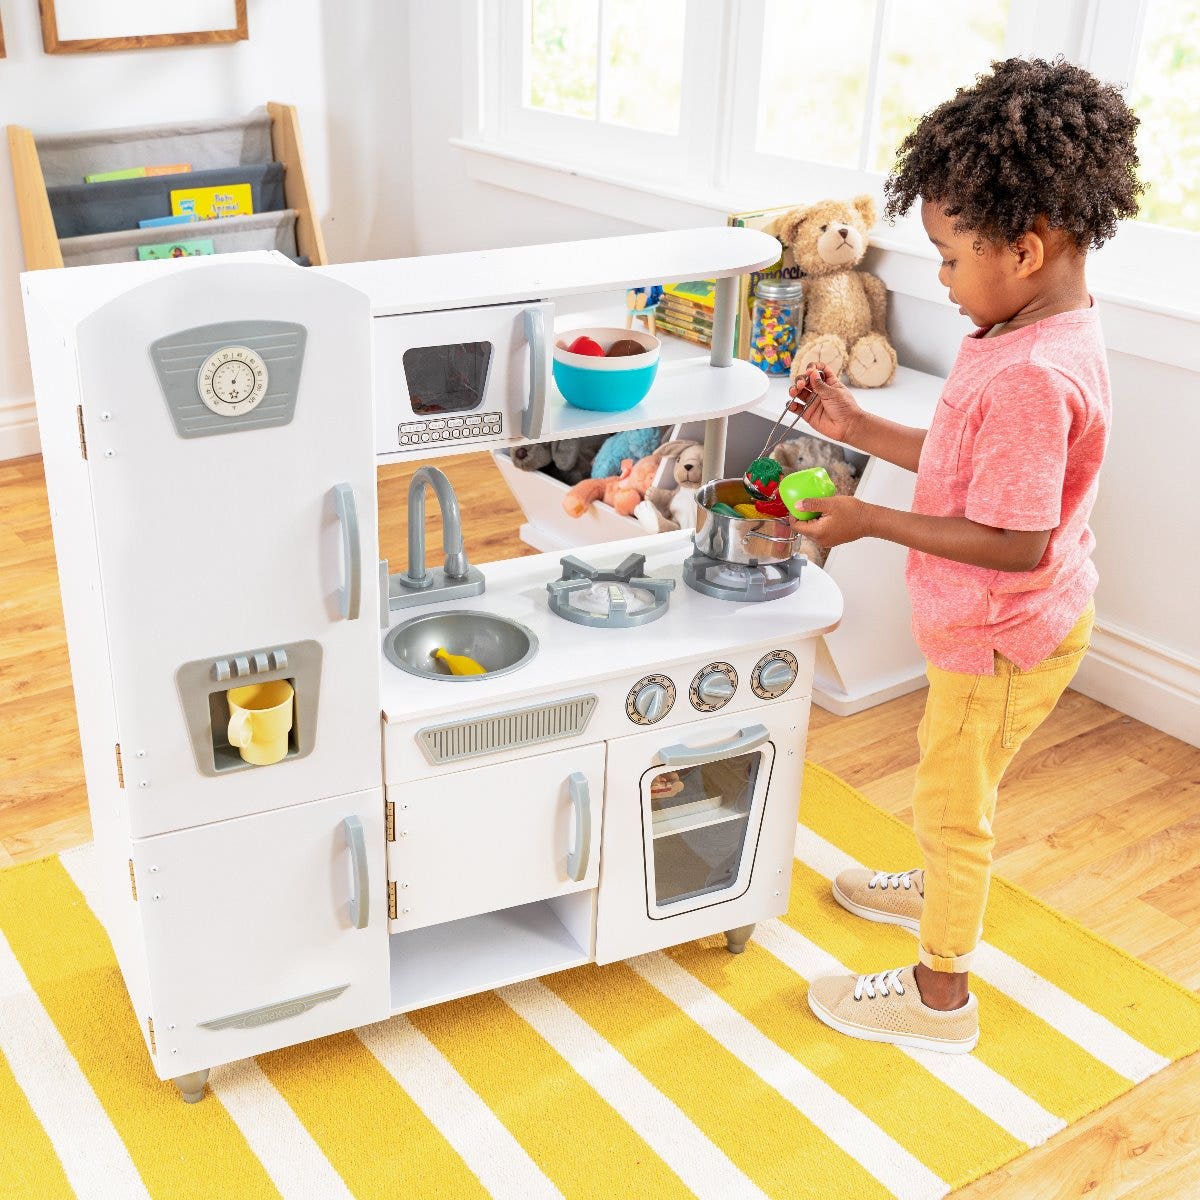 Open Concept: See-through middle and open shelving provides an imaginative play area for kids to serve up food.
